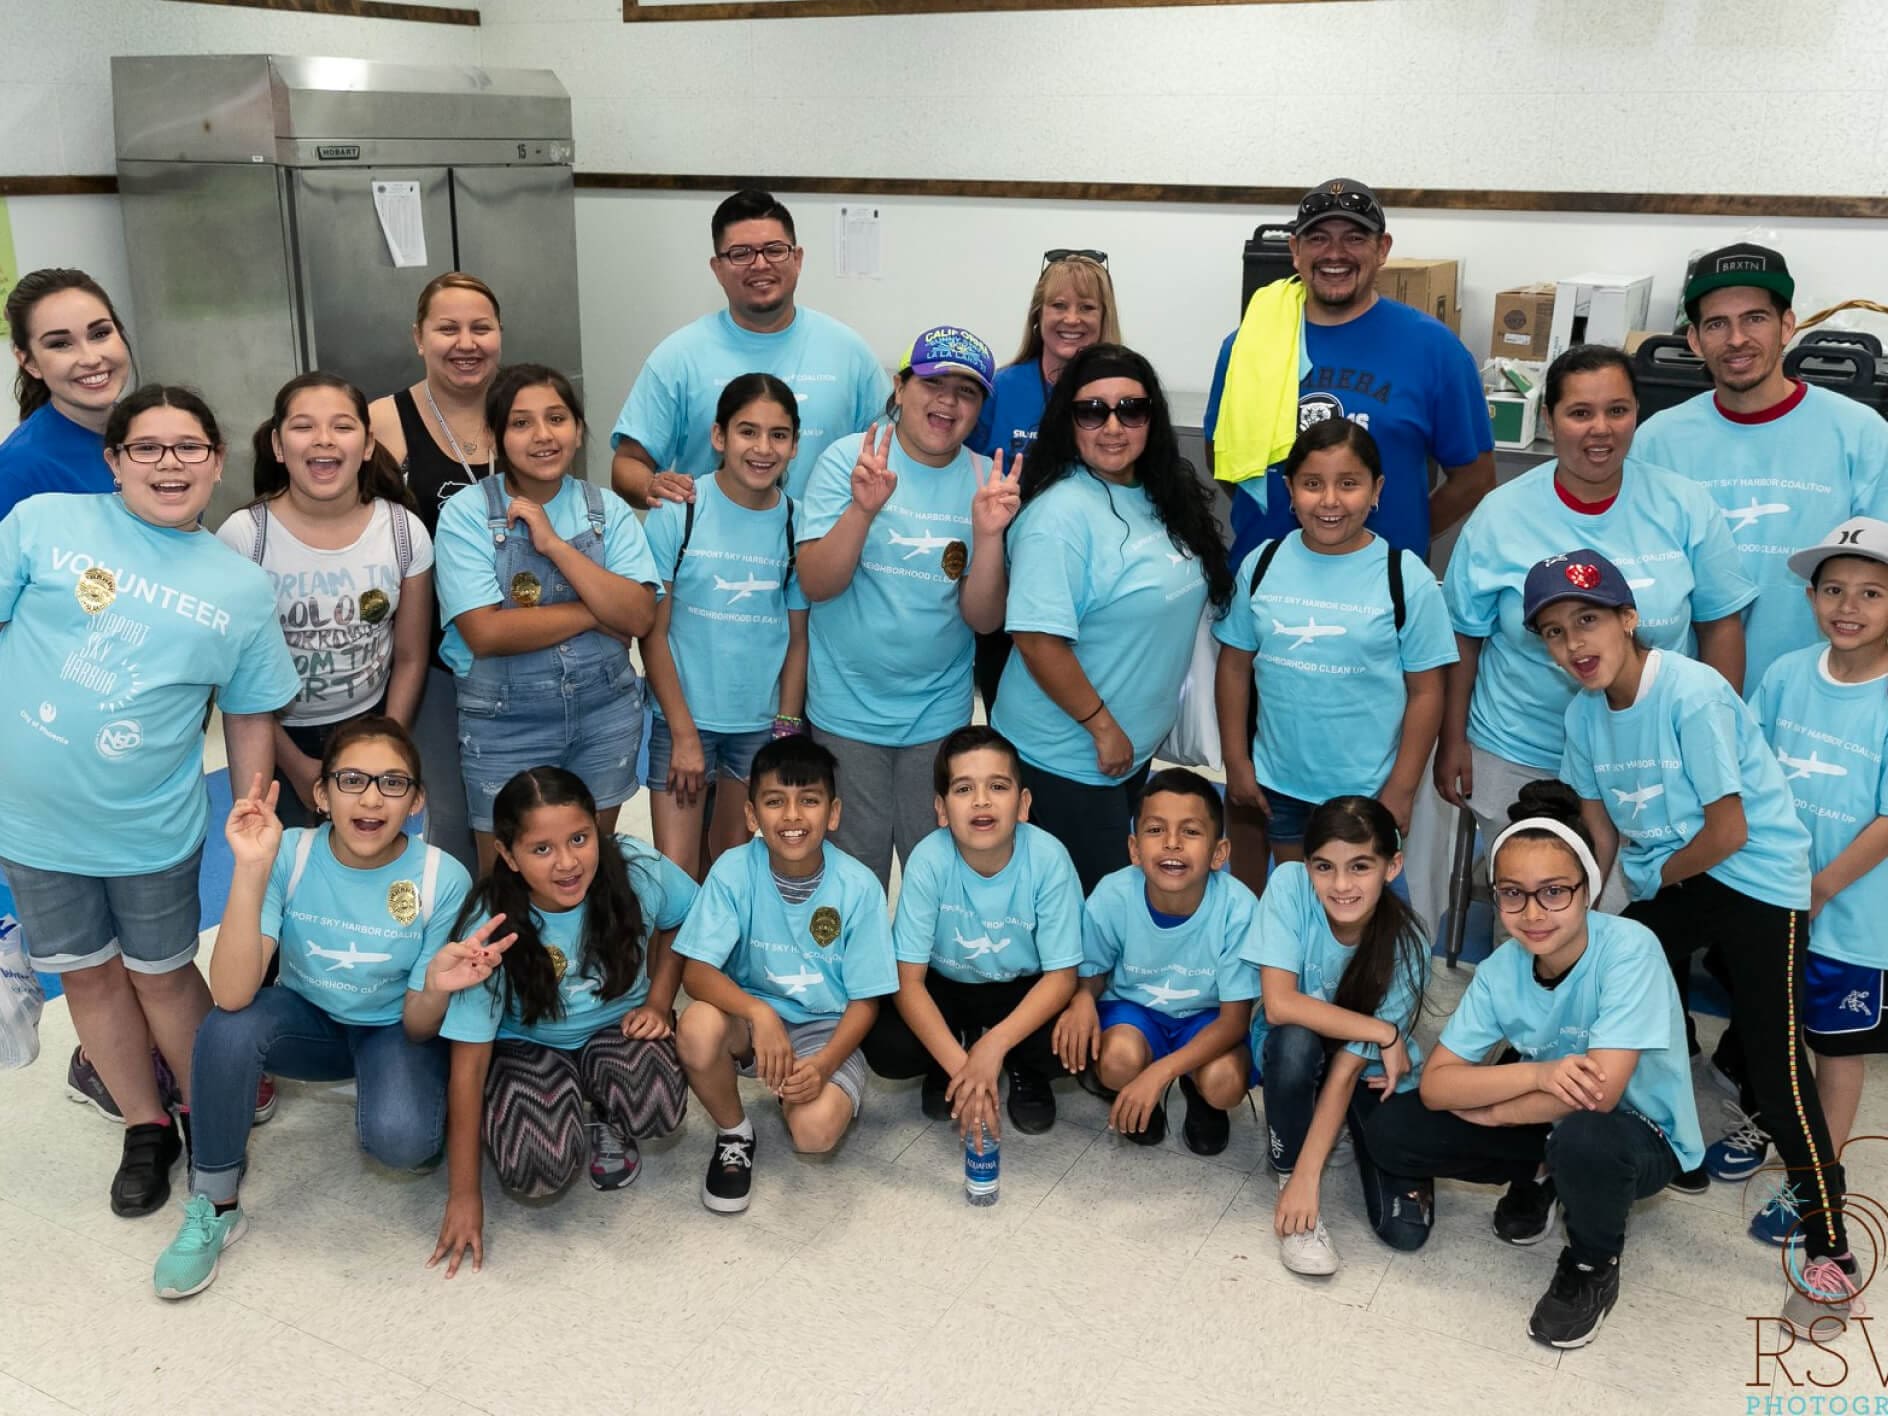 Herrera School for the Arts and Dual Language students and faculty